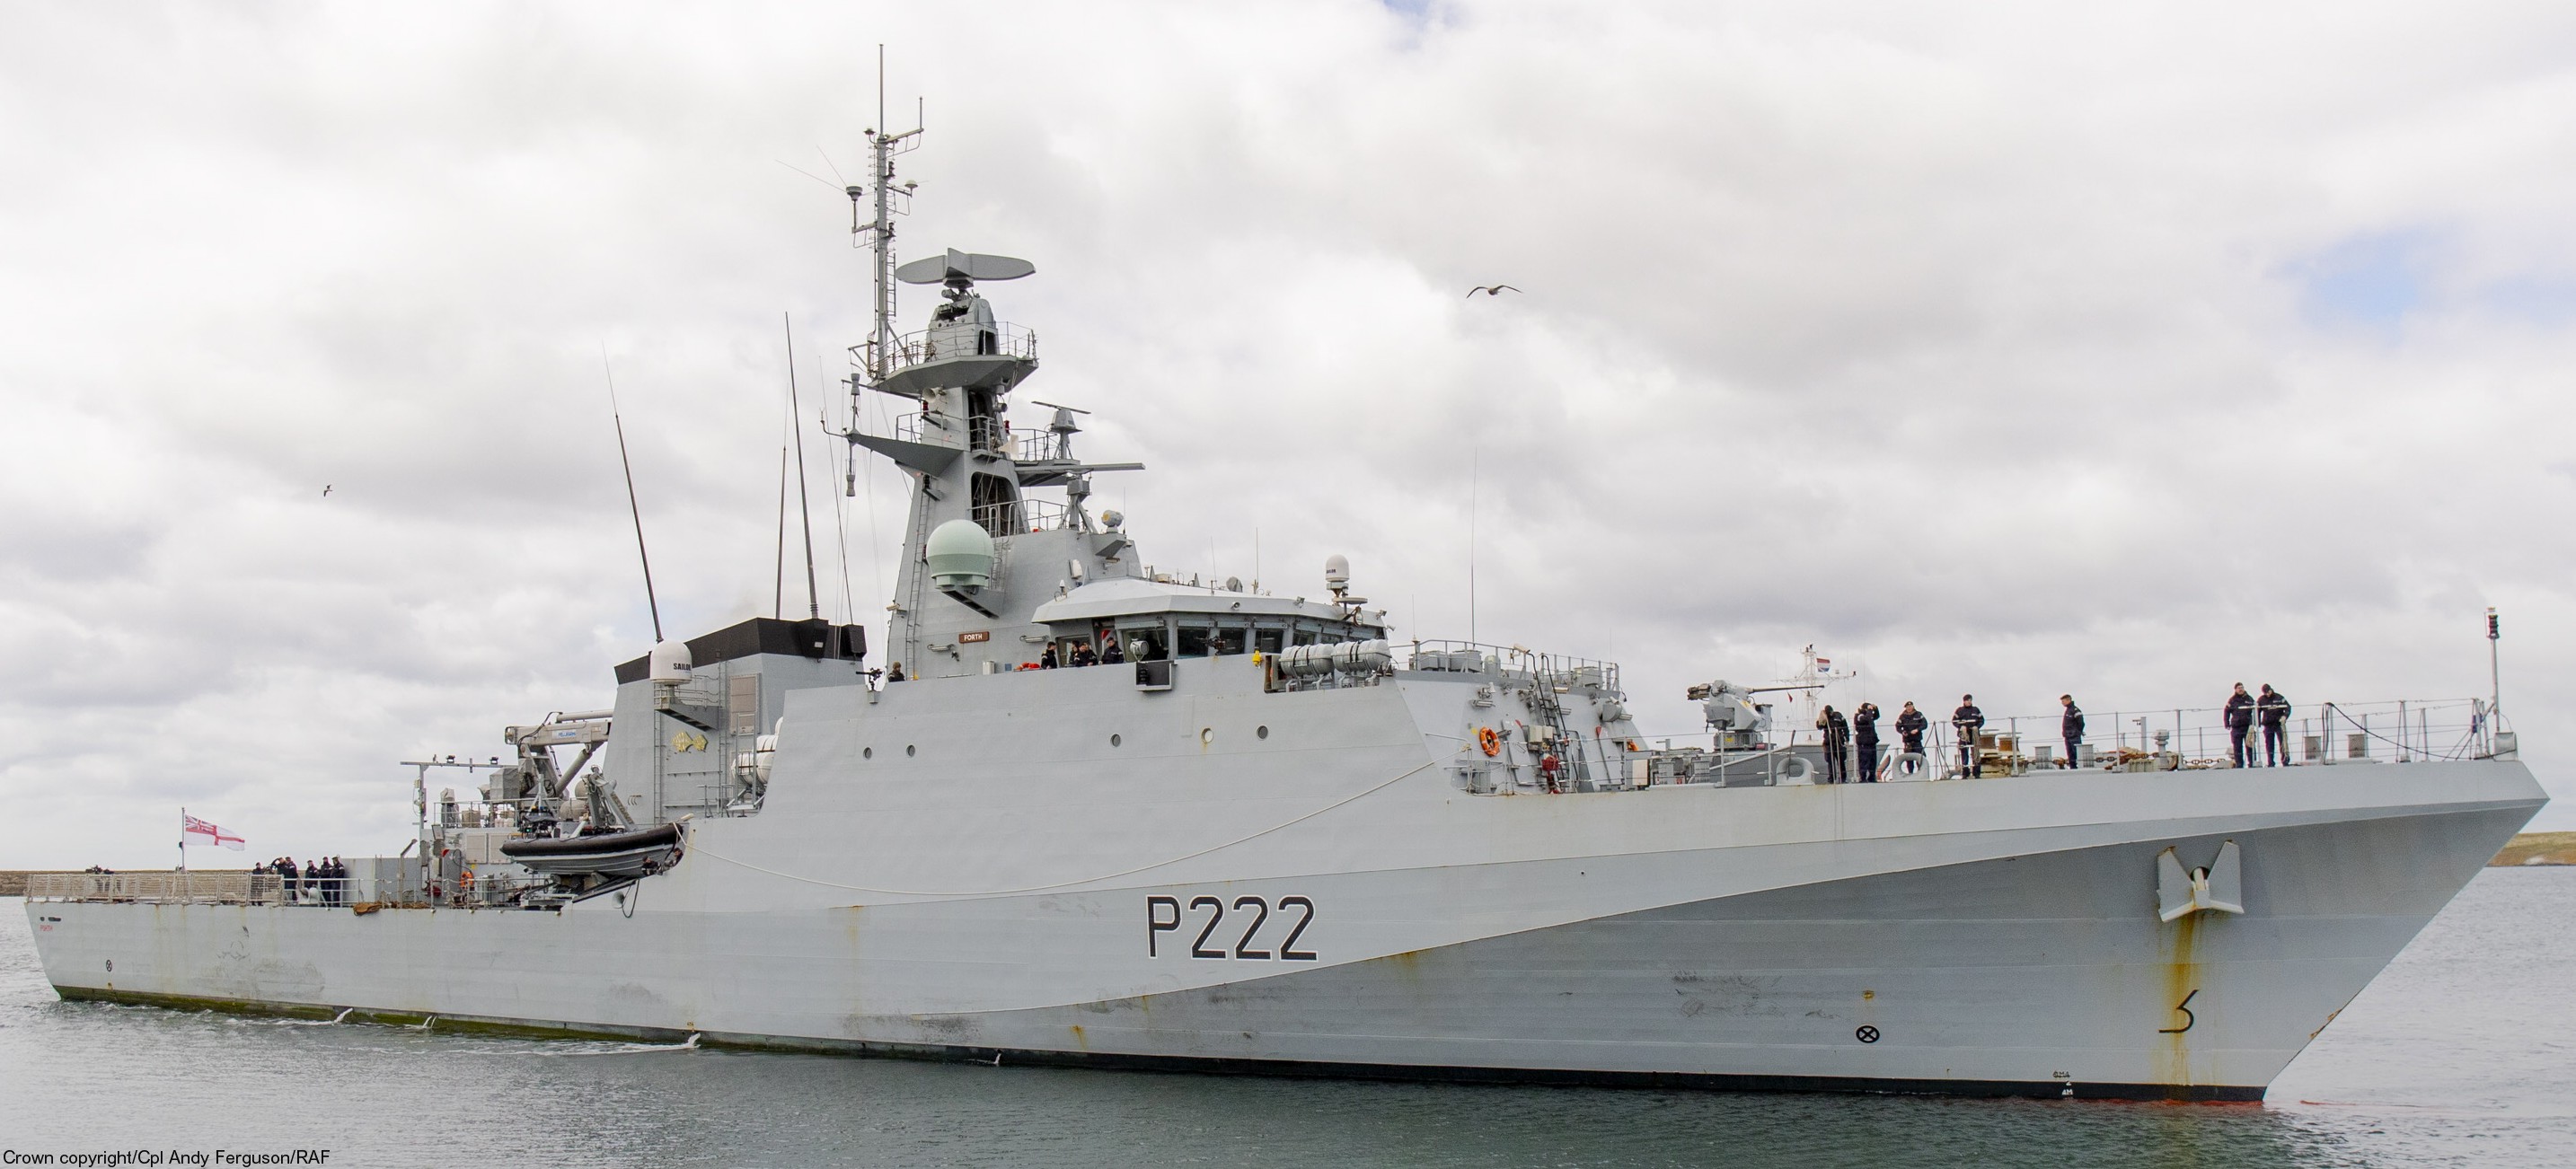 p222 hms forth river class offshore patrol vessel opv royal navy 08